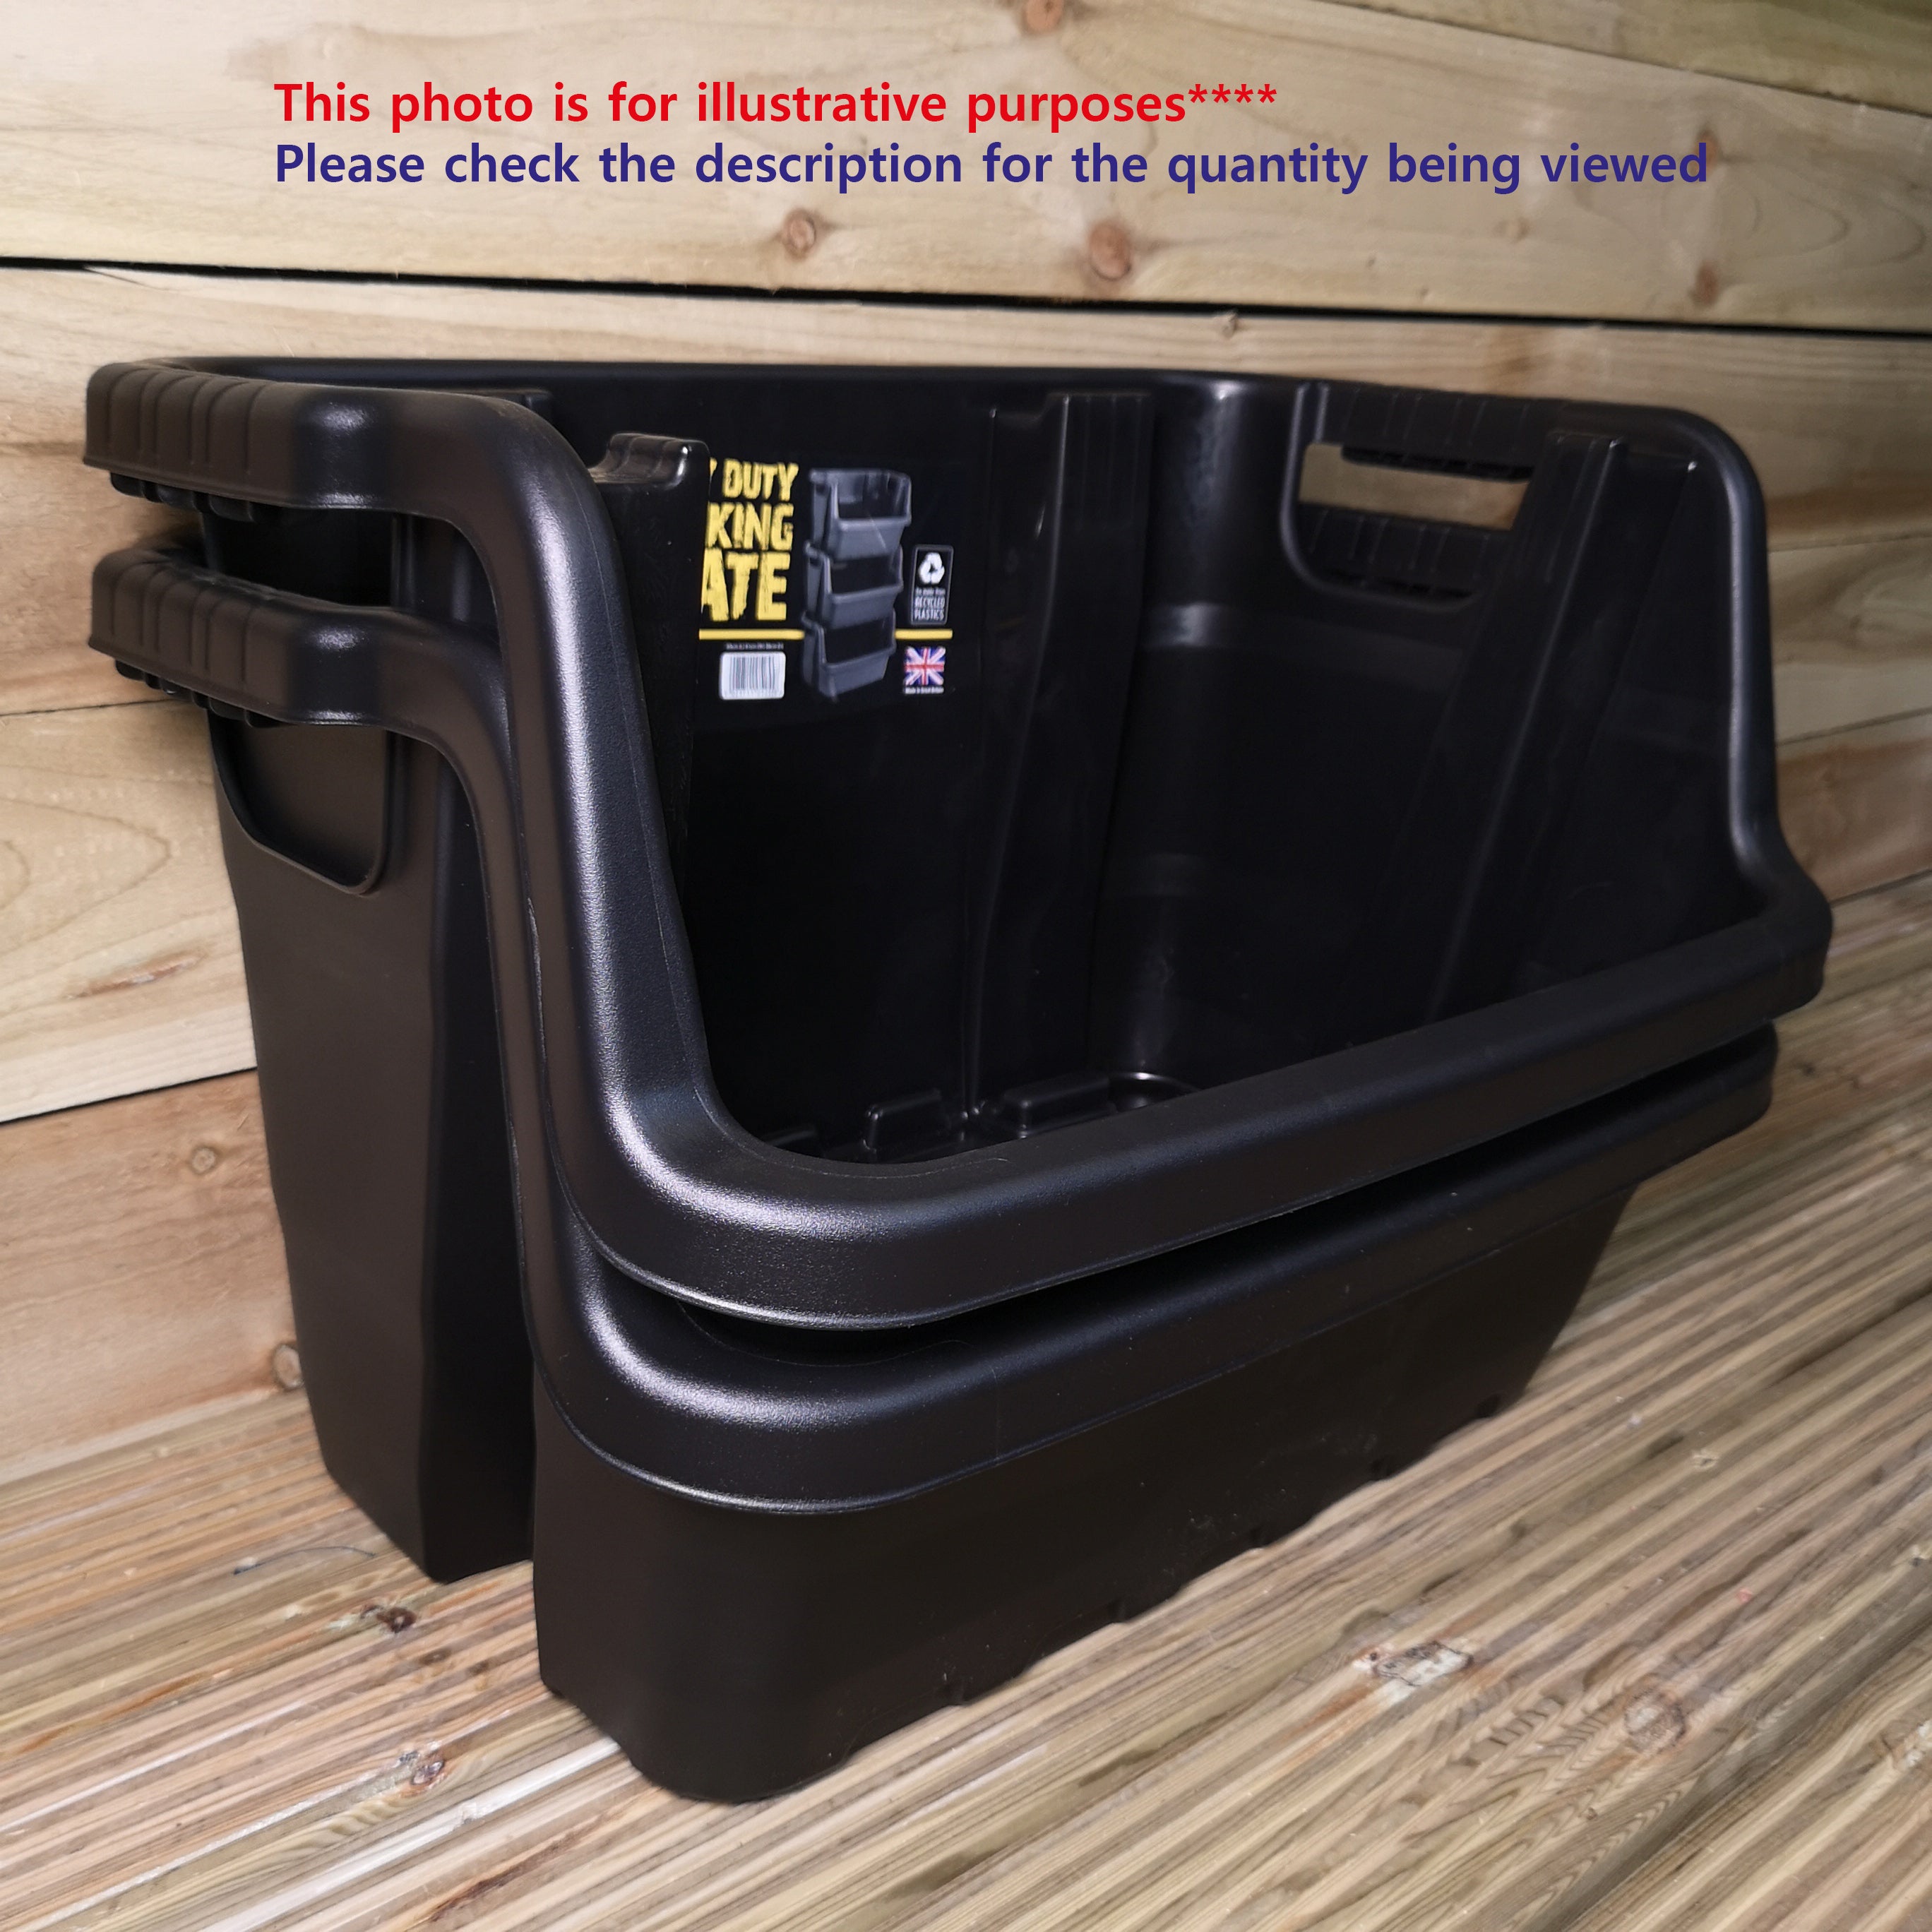 Pack of 3 / 59 x 41 x 36cm Heavy Duty Plastic Stackable Crates / Pick Bins with Handles